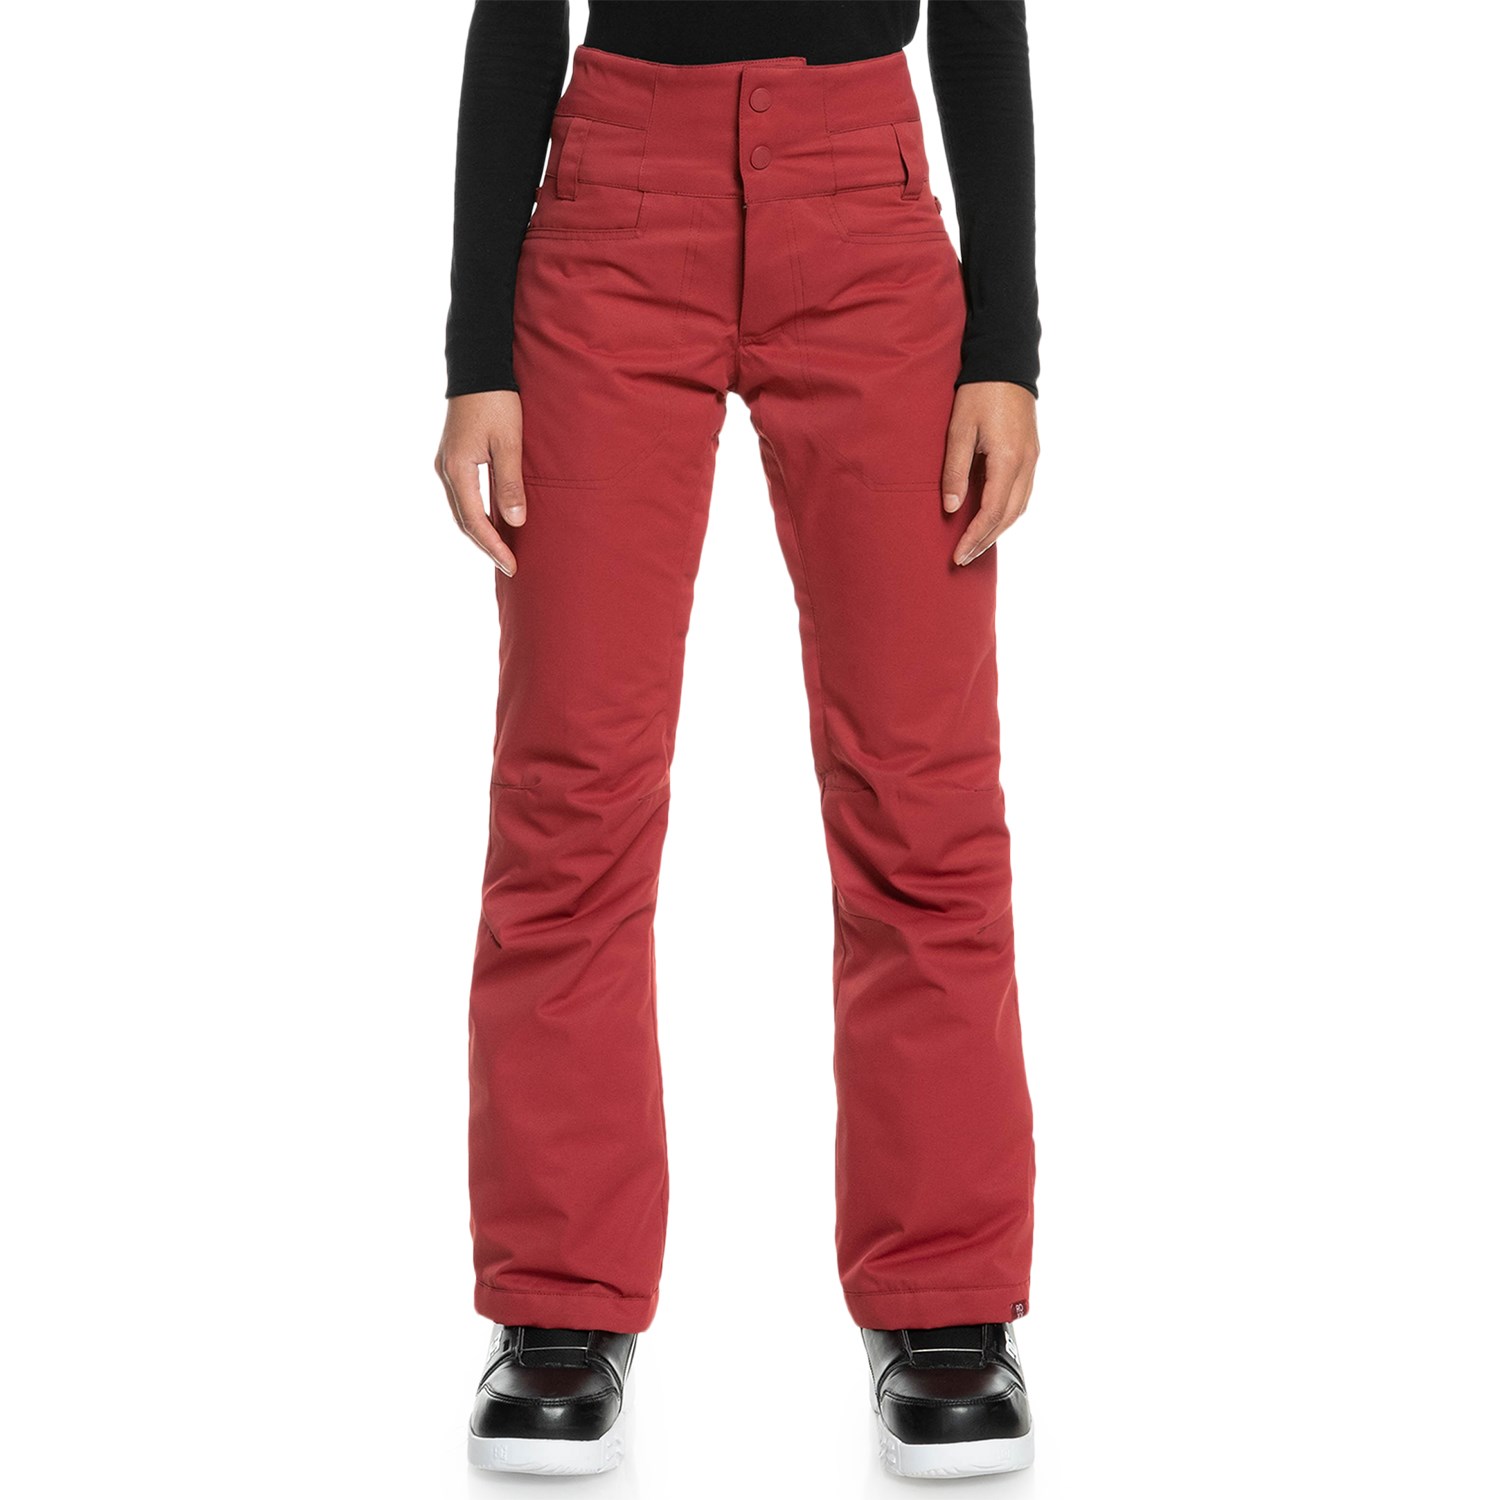 Boardstore Diversion - Technical Snow Pants For Women by ROXY